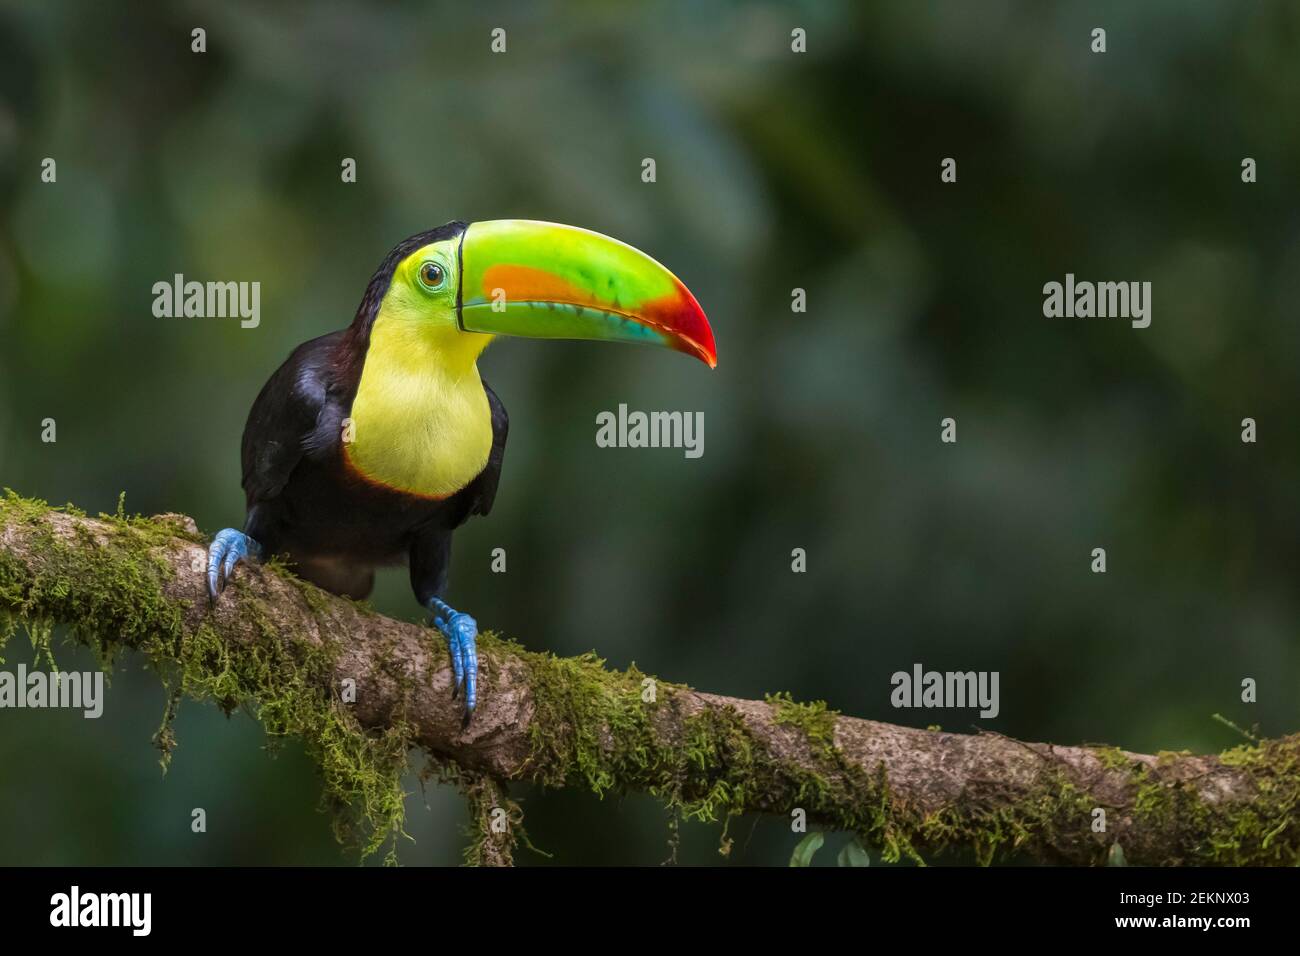 Keel-billed Toucan (Ramphastos Sulfuratus) with striking multicolored bill and contrast colors, green, orange, red, yellow, black and blue Stock Photo